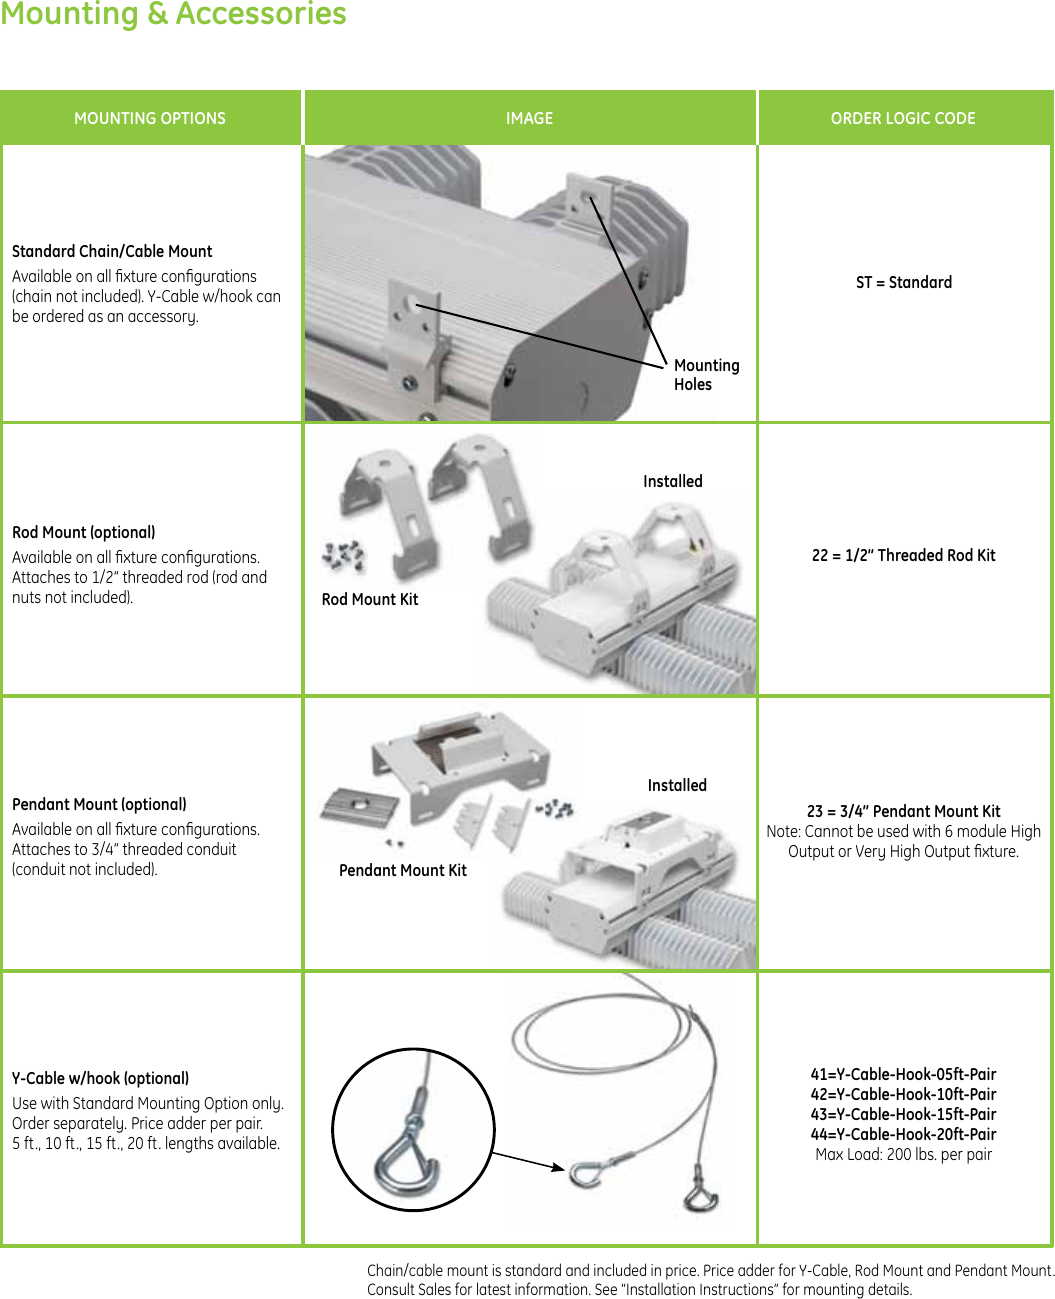 Page 6 of 8 - GE LED Fixtures Albeo ABHX Series Modular High Bay And Low Luminaire Datasheet | Lighting